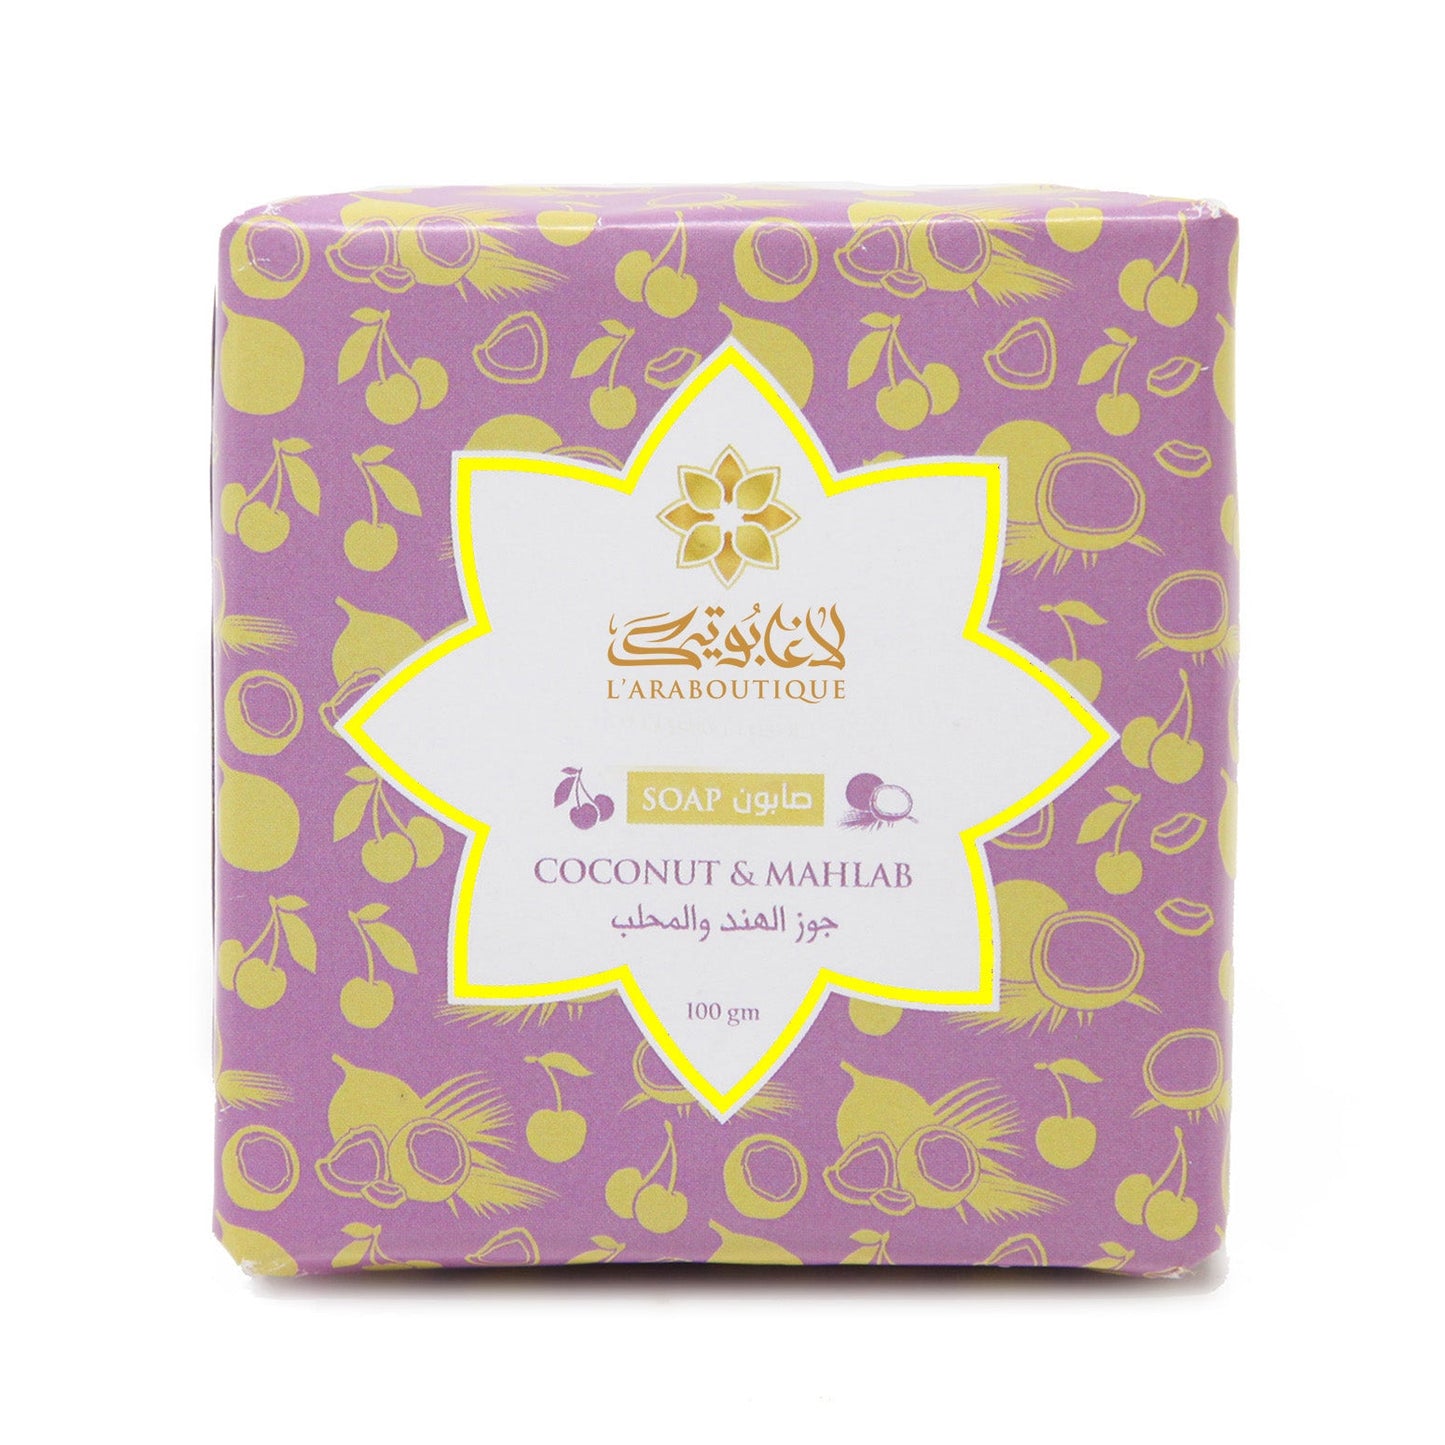 Coconut and Mahlab Soap - 100g